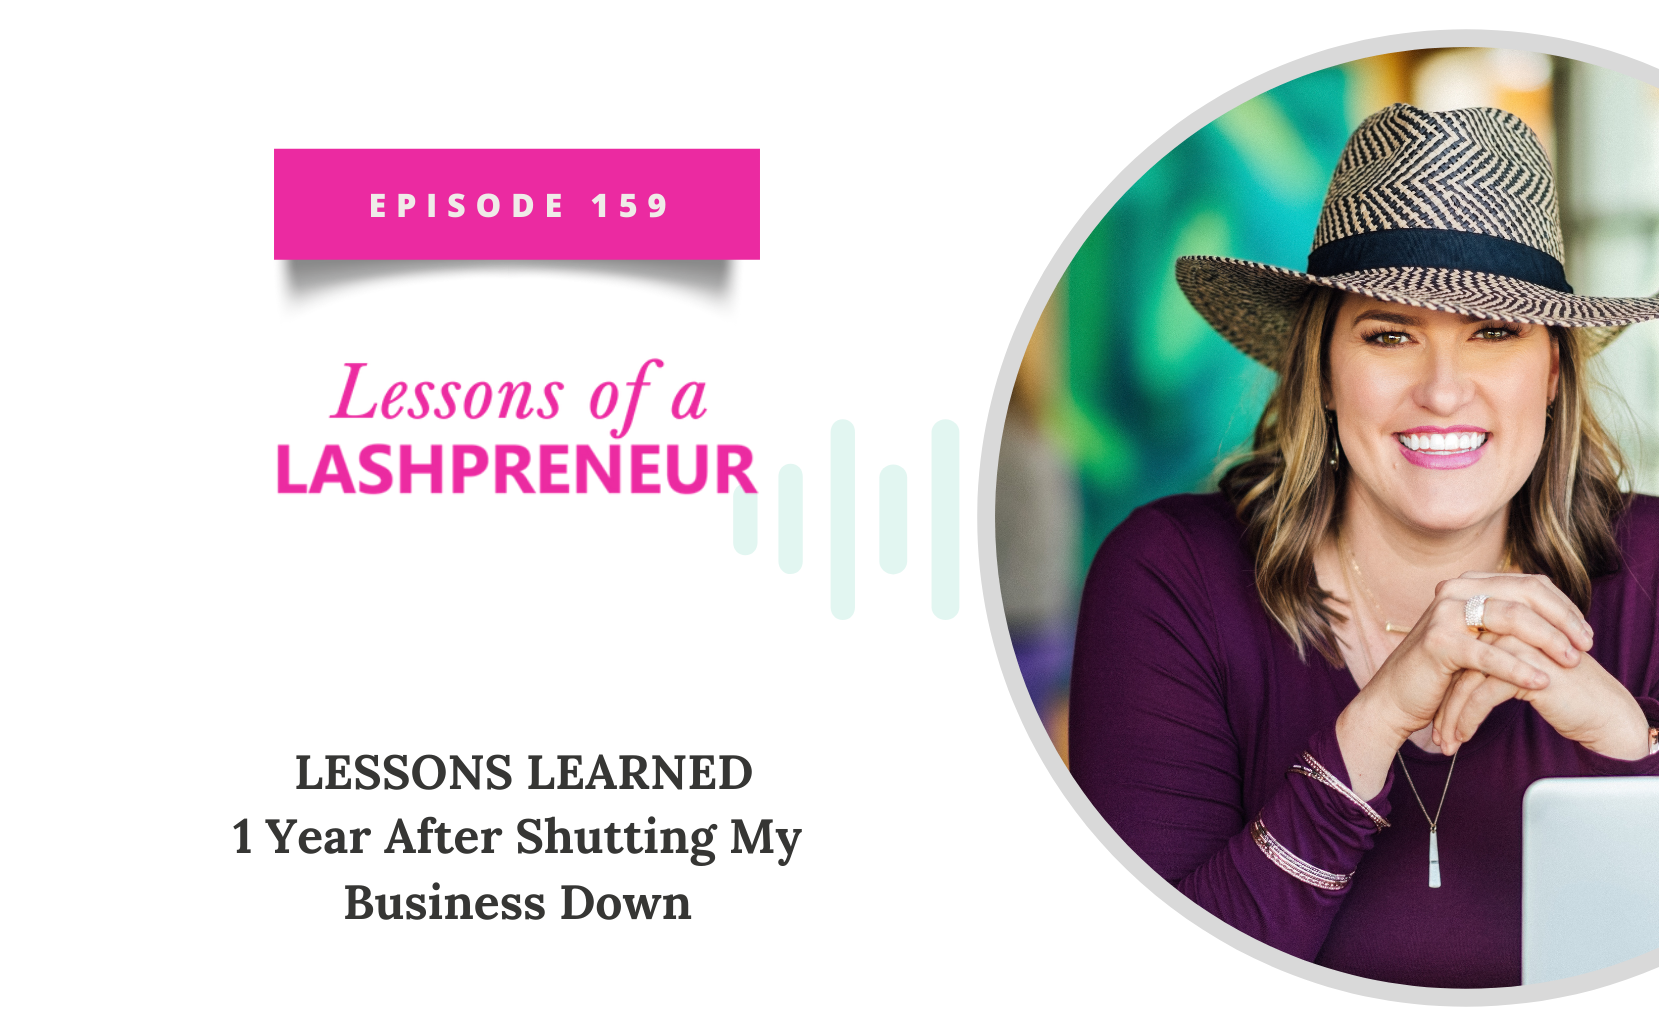 Lessons Learned 1 Year After Shutting My Business Down